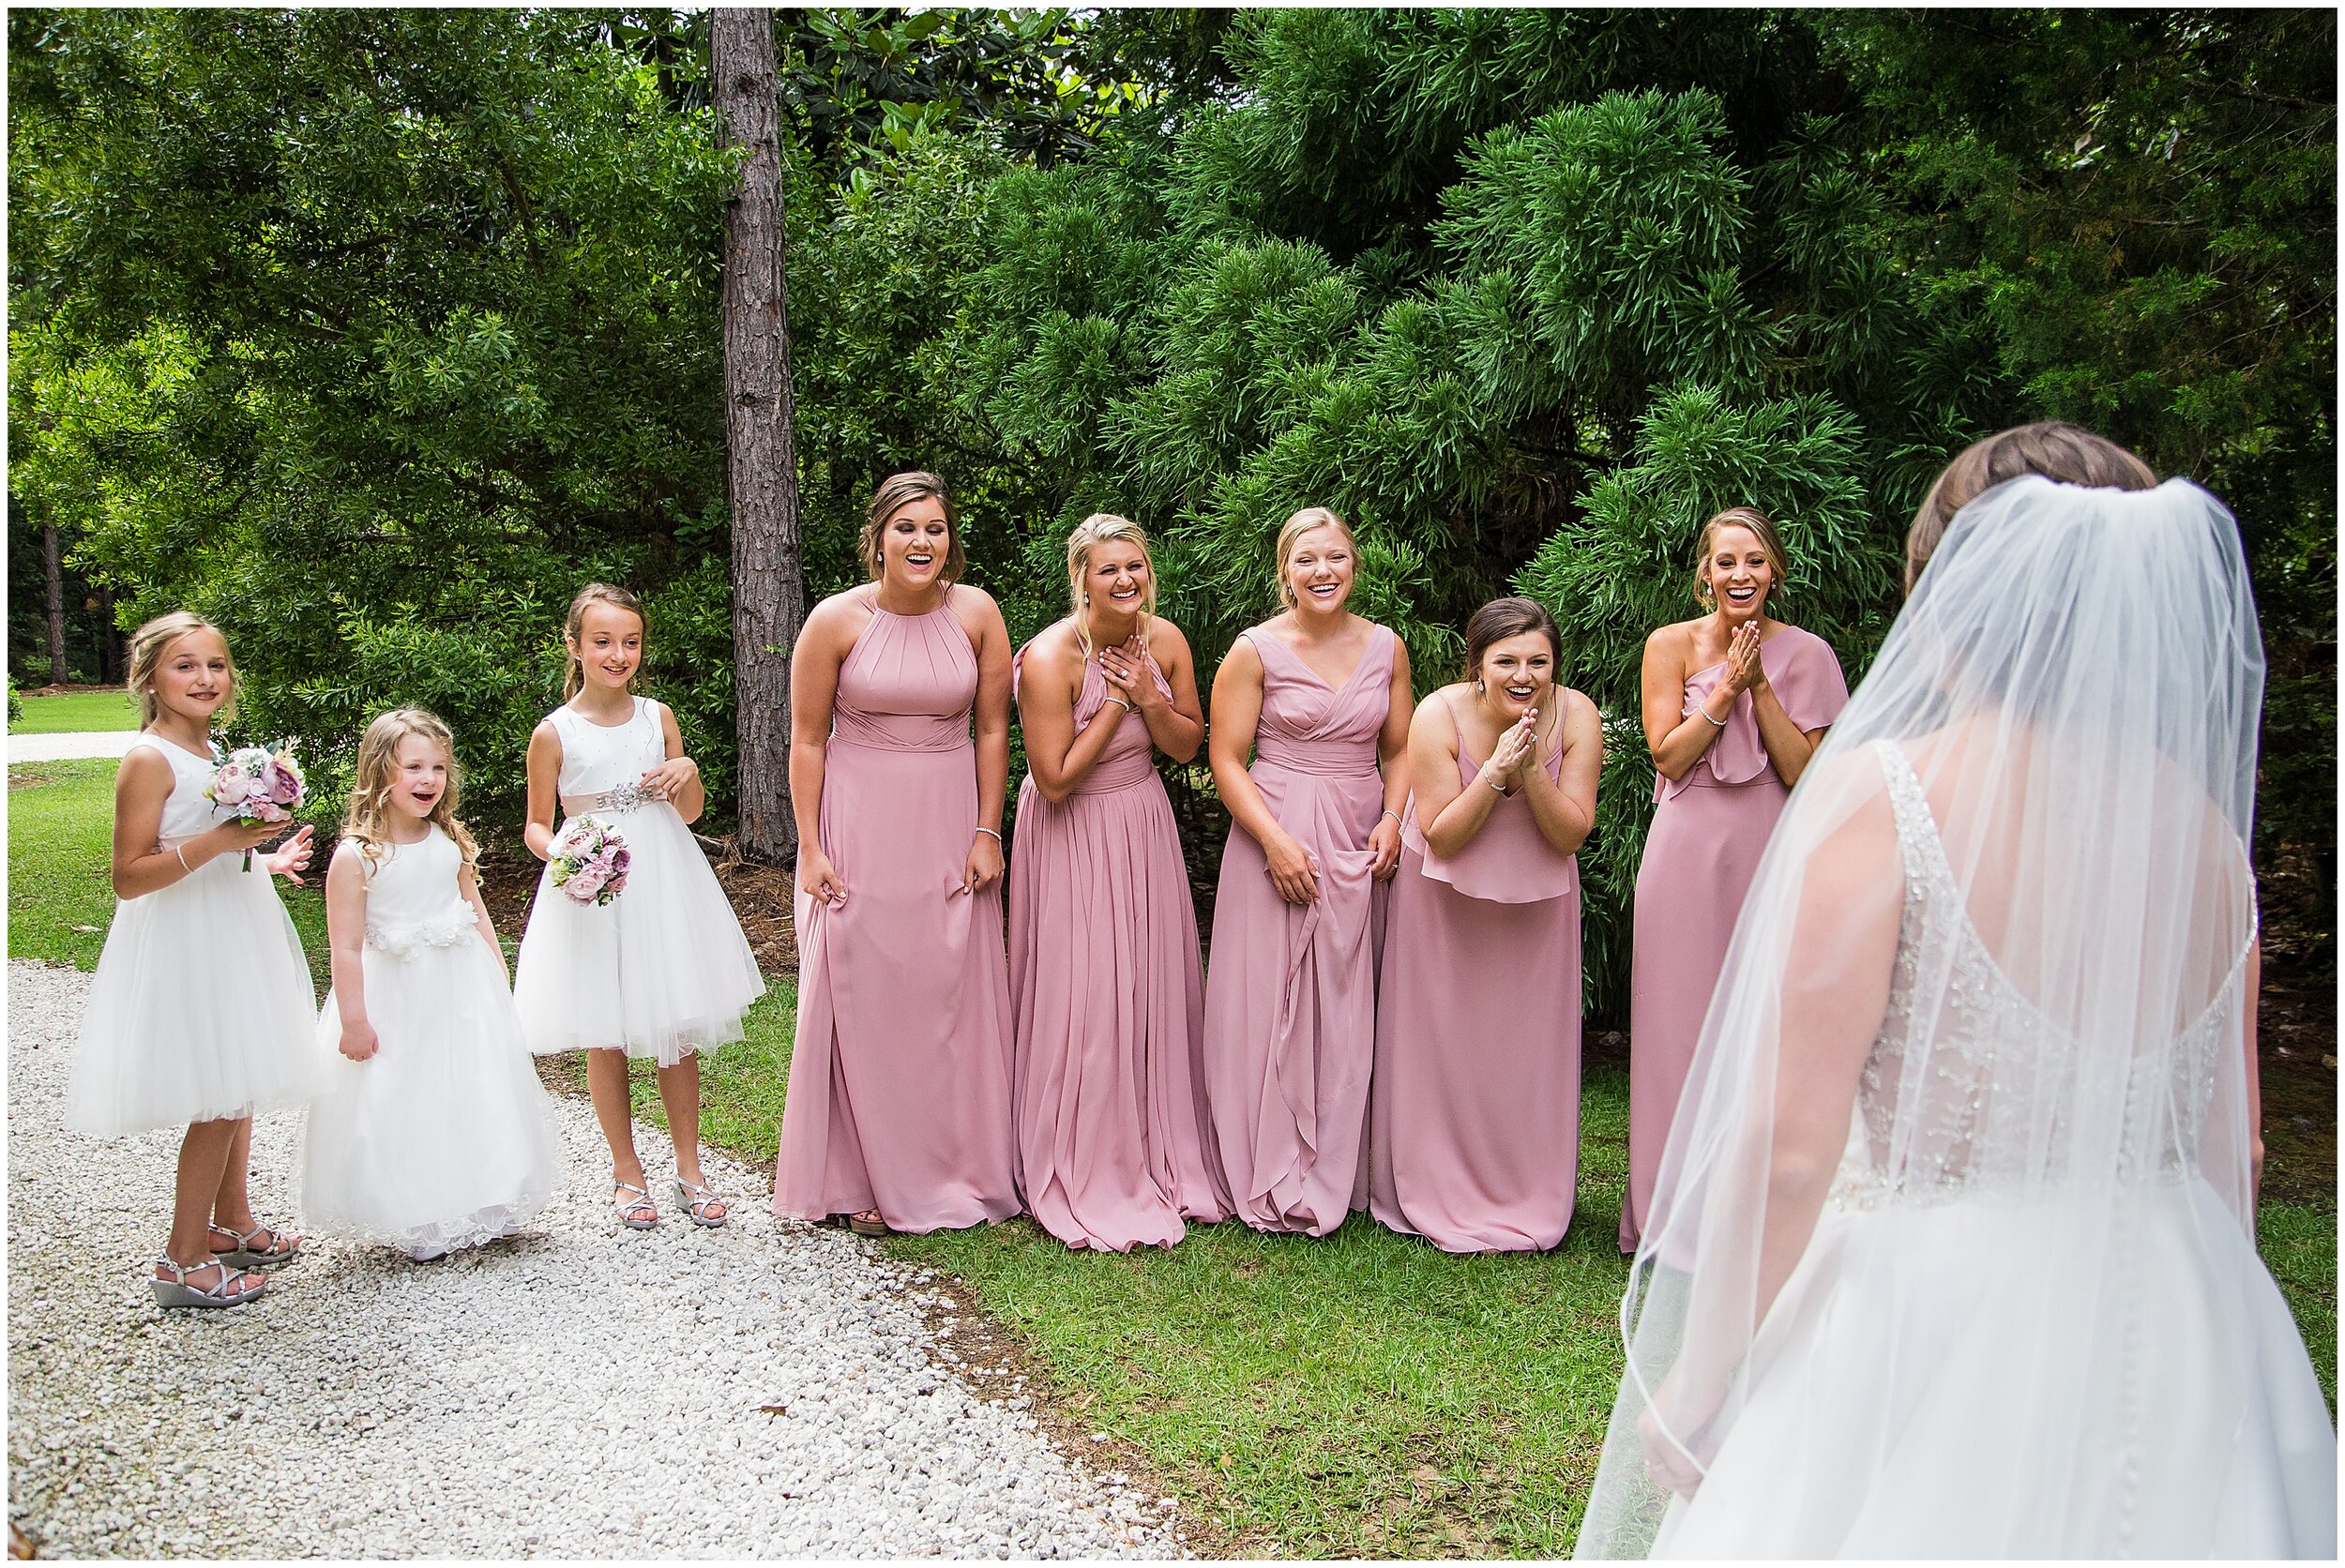 bridesmaids reacting to seeing bride in her gown and veil at bella sera gardens for photography and videography